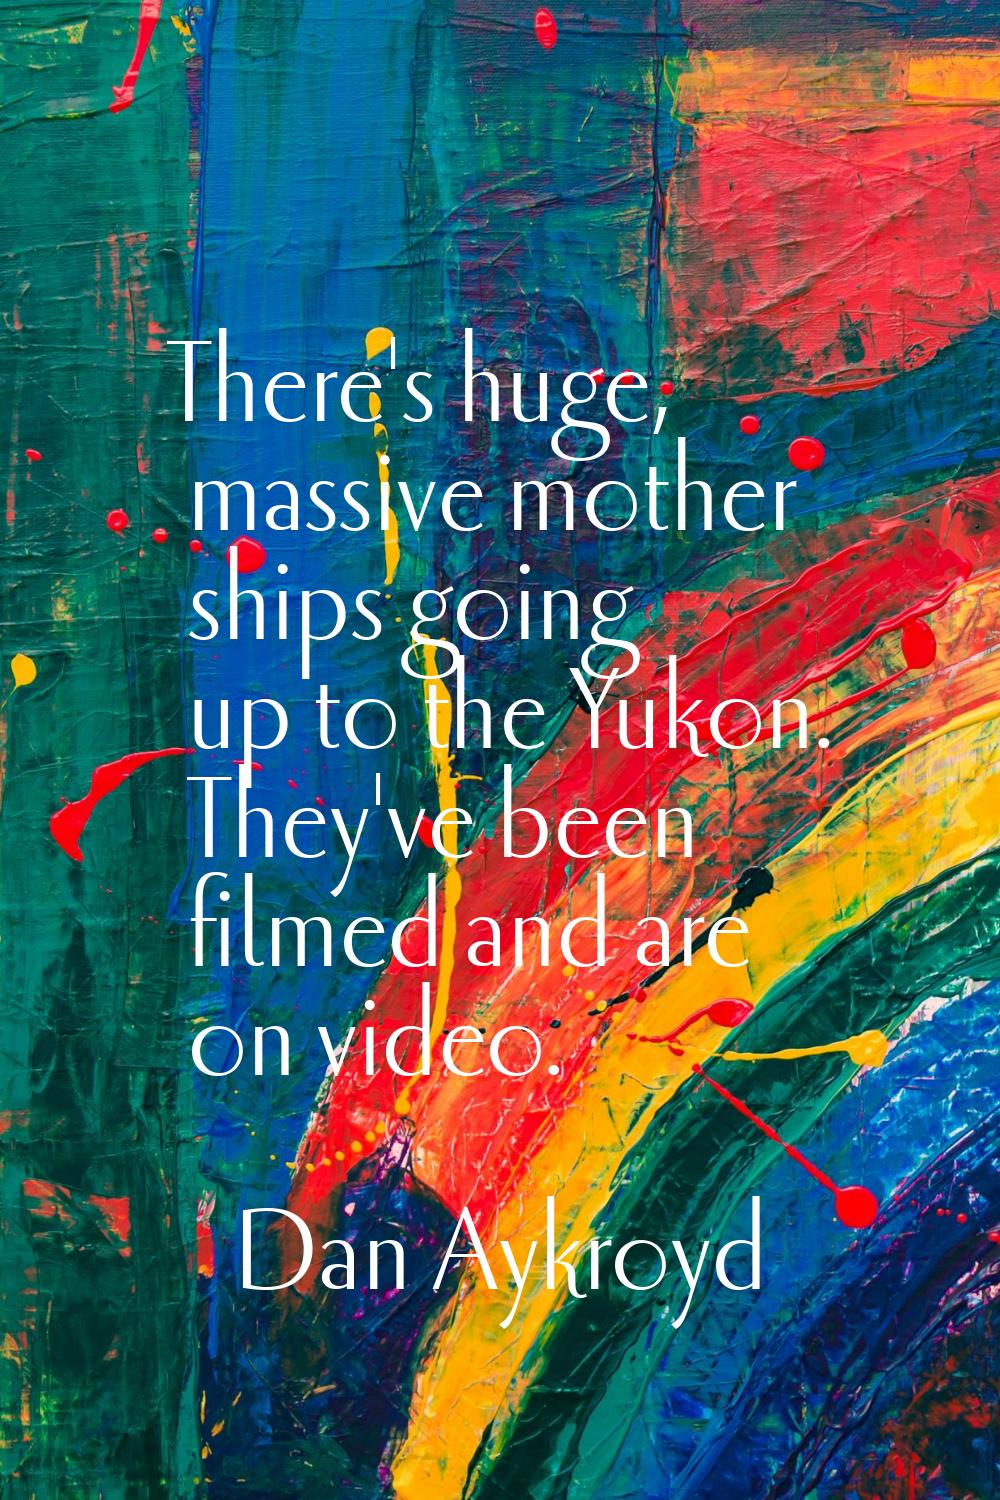 There's huge, massive mother ships going up to the Yukon. They've been filmed and are on video.